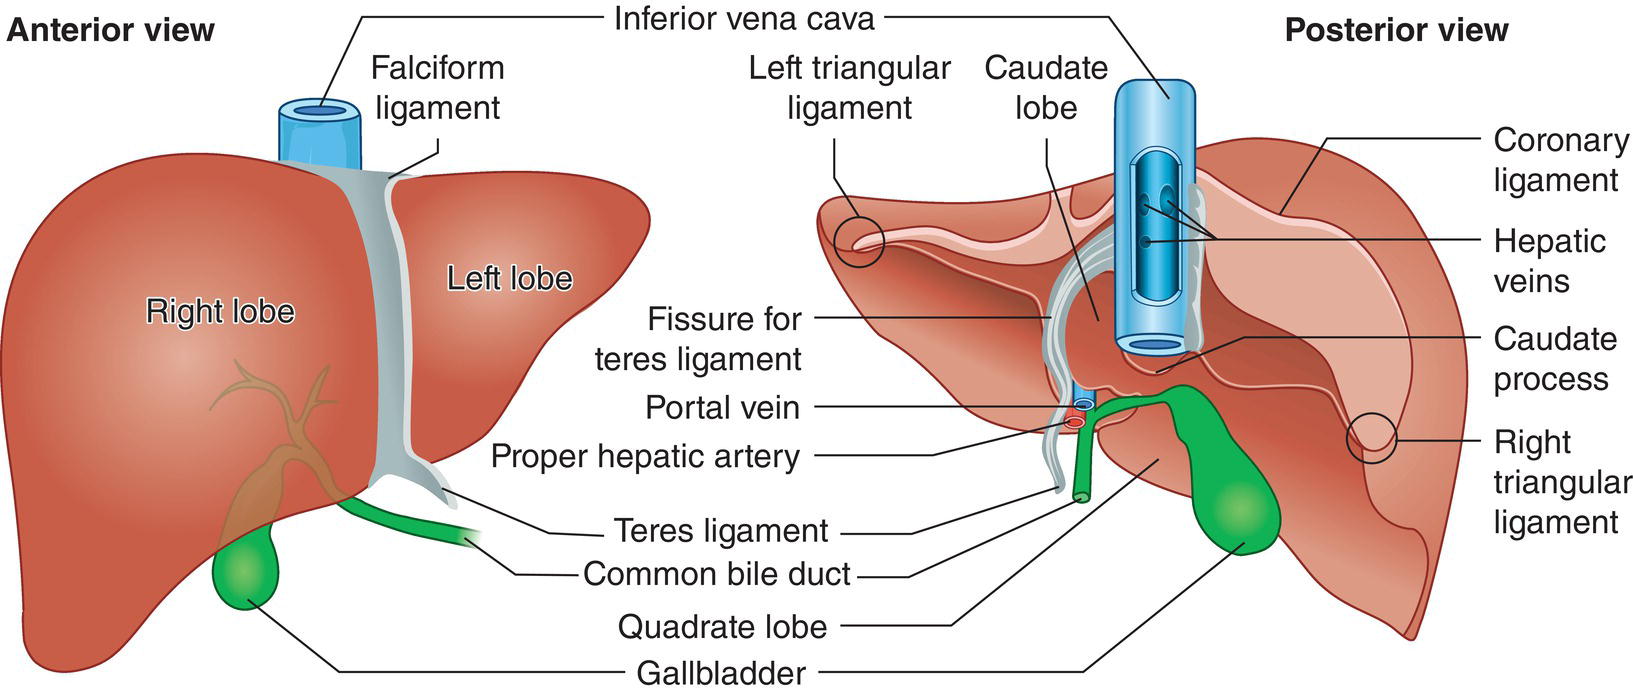 A schematic diagram of the liver showing anterior view and posterior view. It contains right lobe, left lobe, falciform ligament, teres ligament, common bile duct, quadrate lobe, gallbladder, coronary ligament, hepatic veins, caudate process, right triangular ligament, caudate lobe, and left triangular ligament.